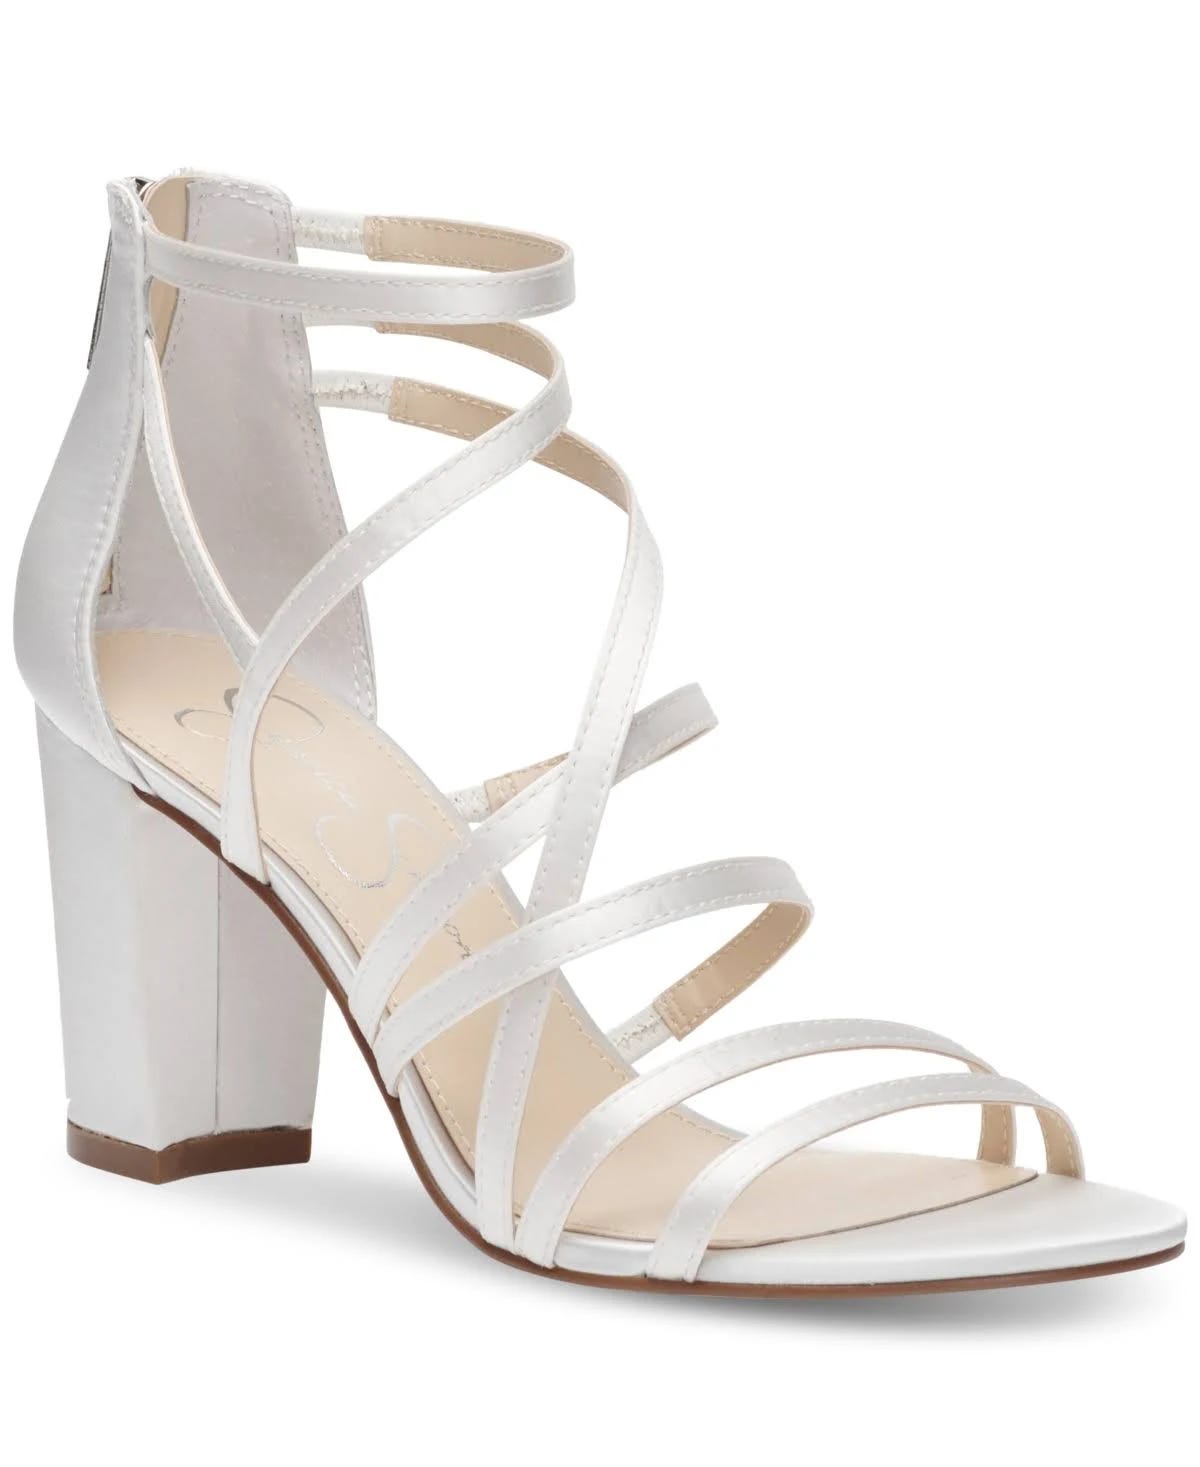 Stylish Size 11 Jessica Simpson Stassey Sandals with Satin Outer and Leather Sole | Image